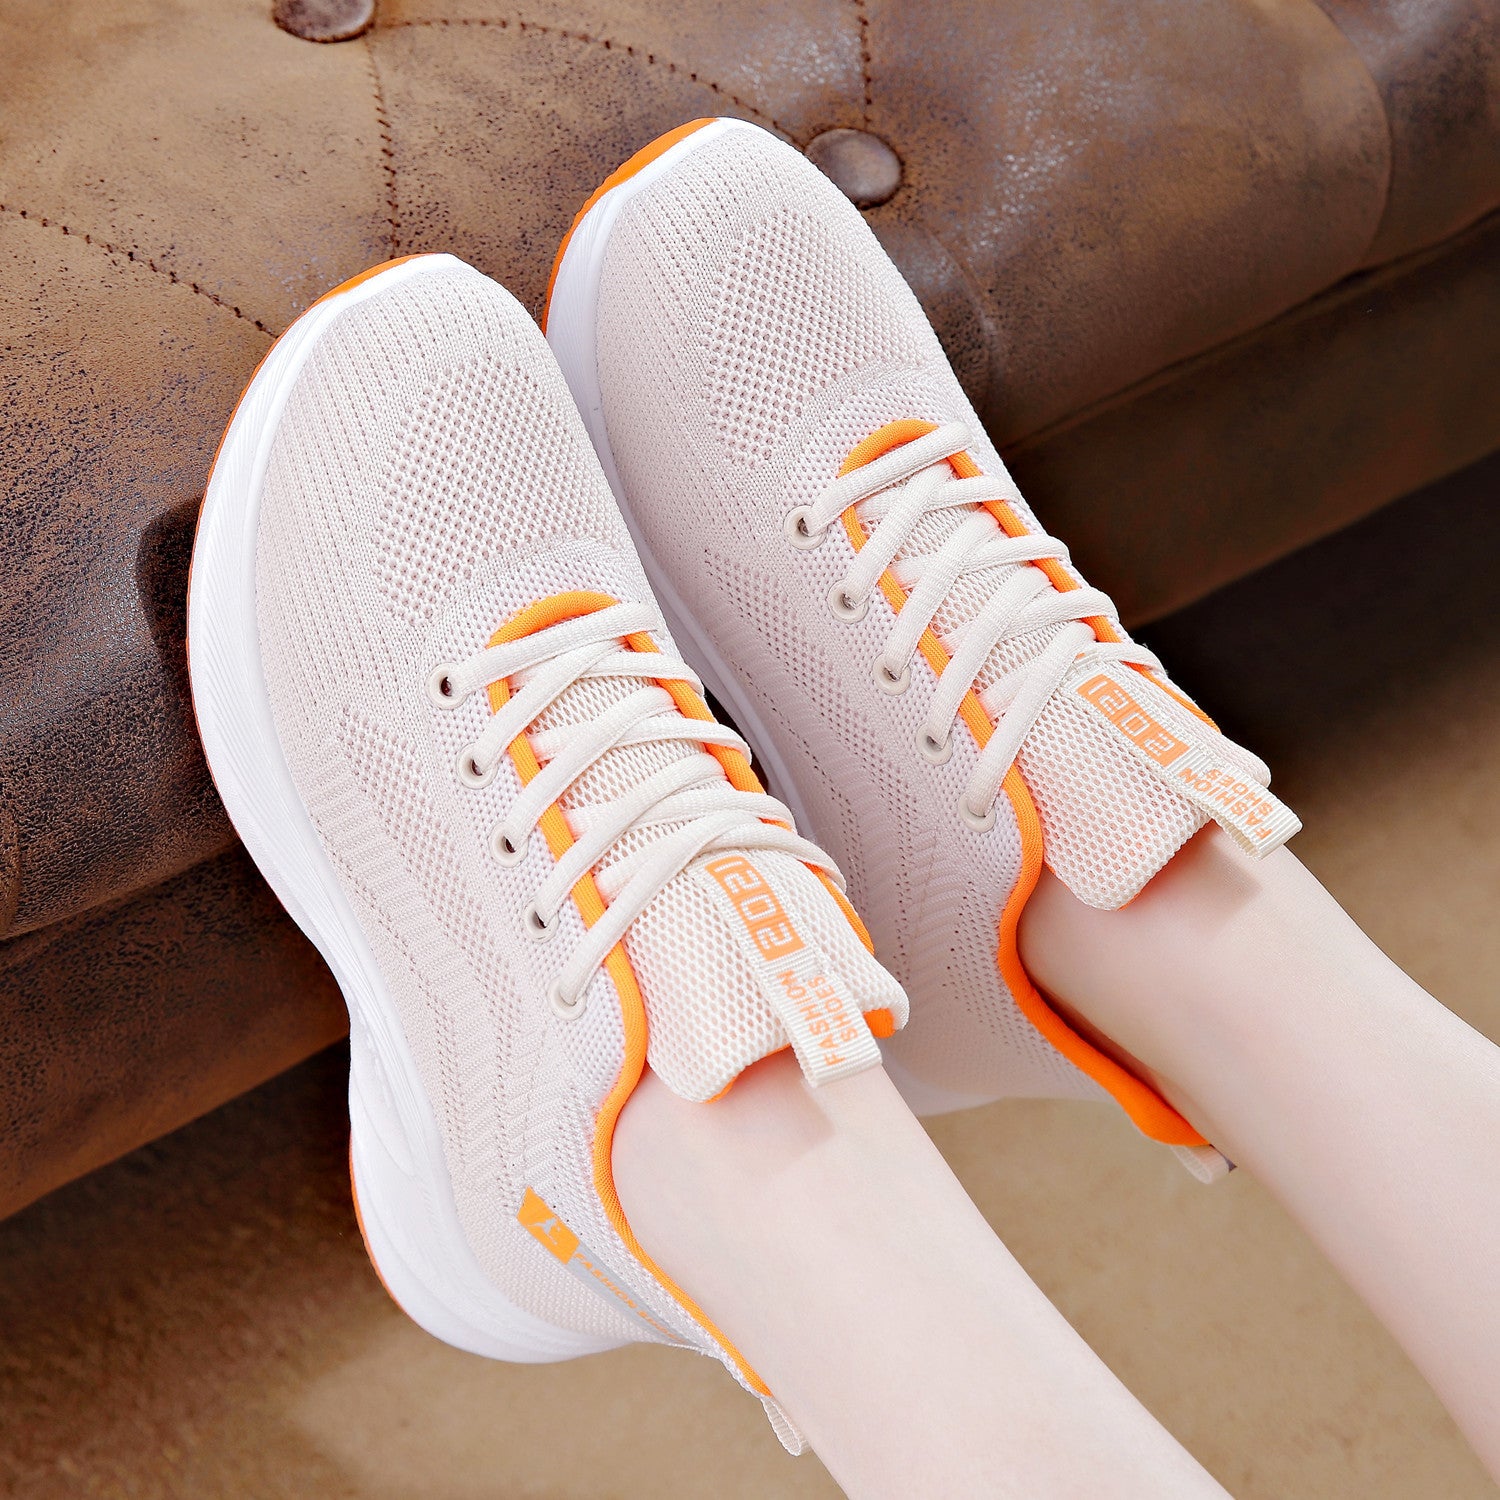 Woven Spring Breathable Tide Fashion Sports And Casual Shoes